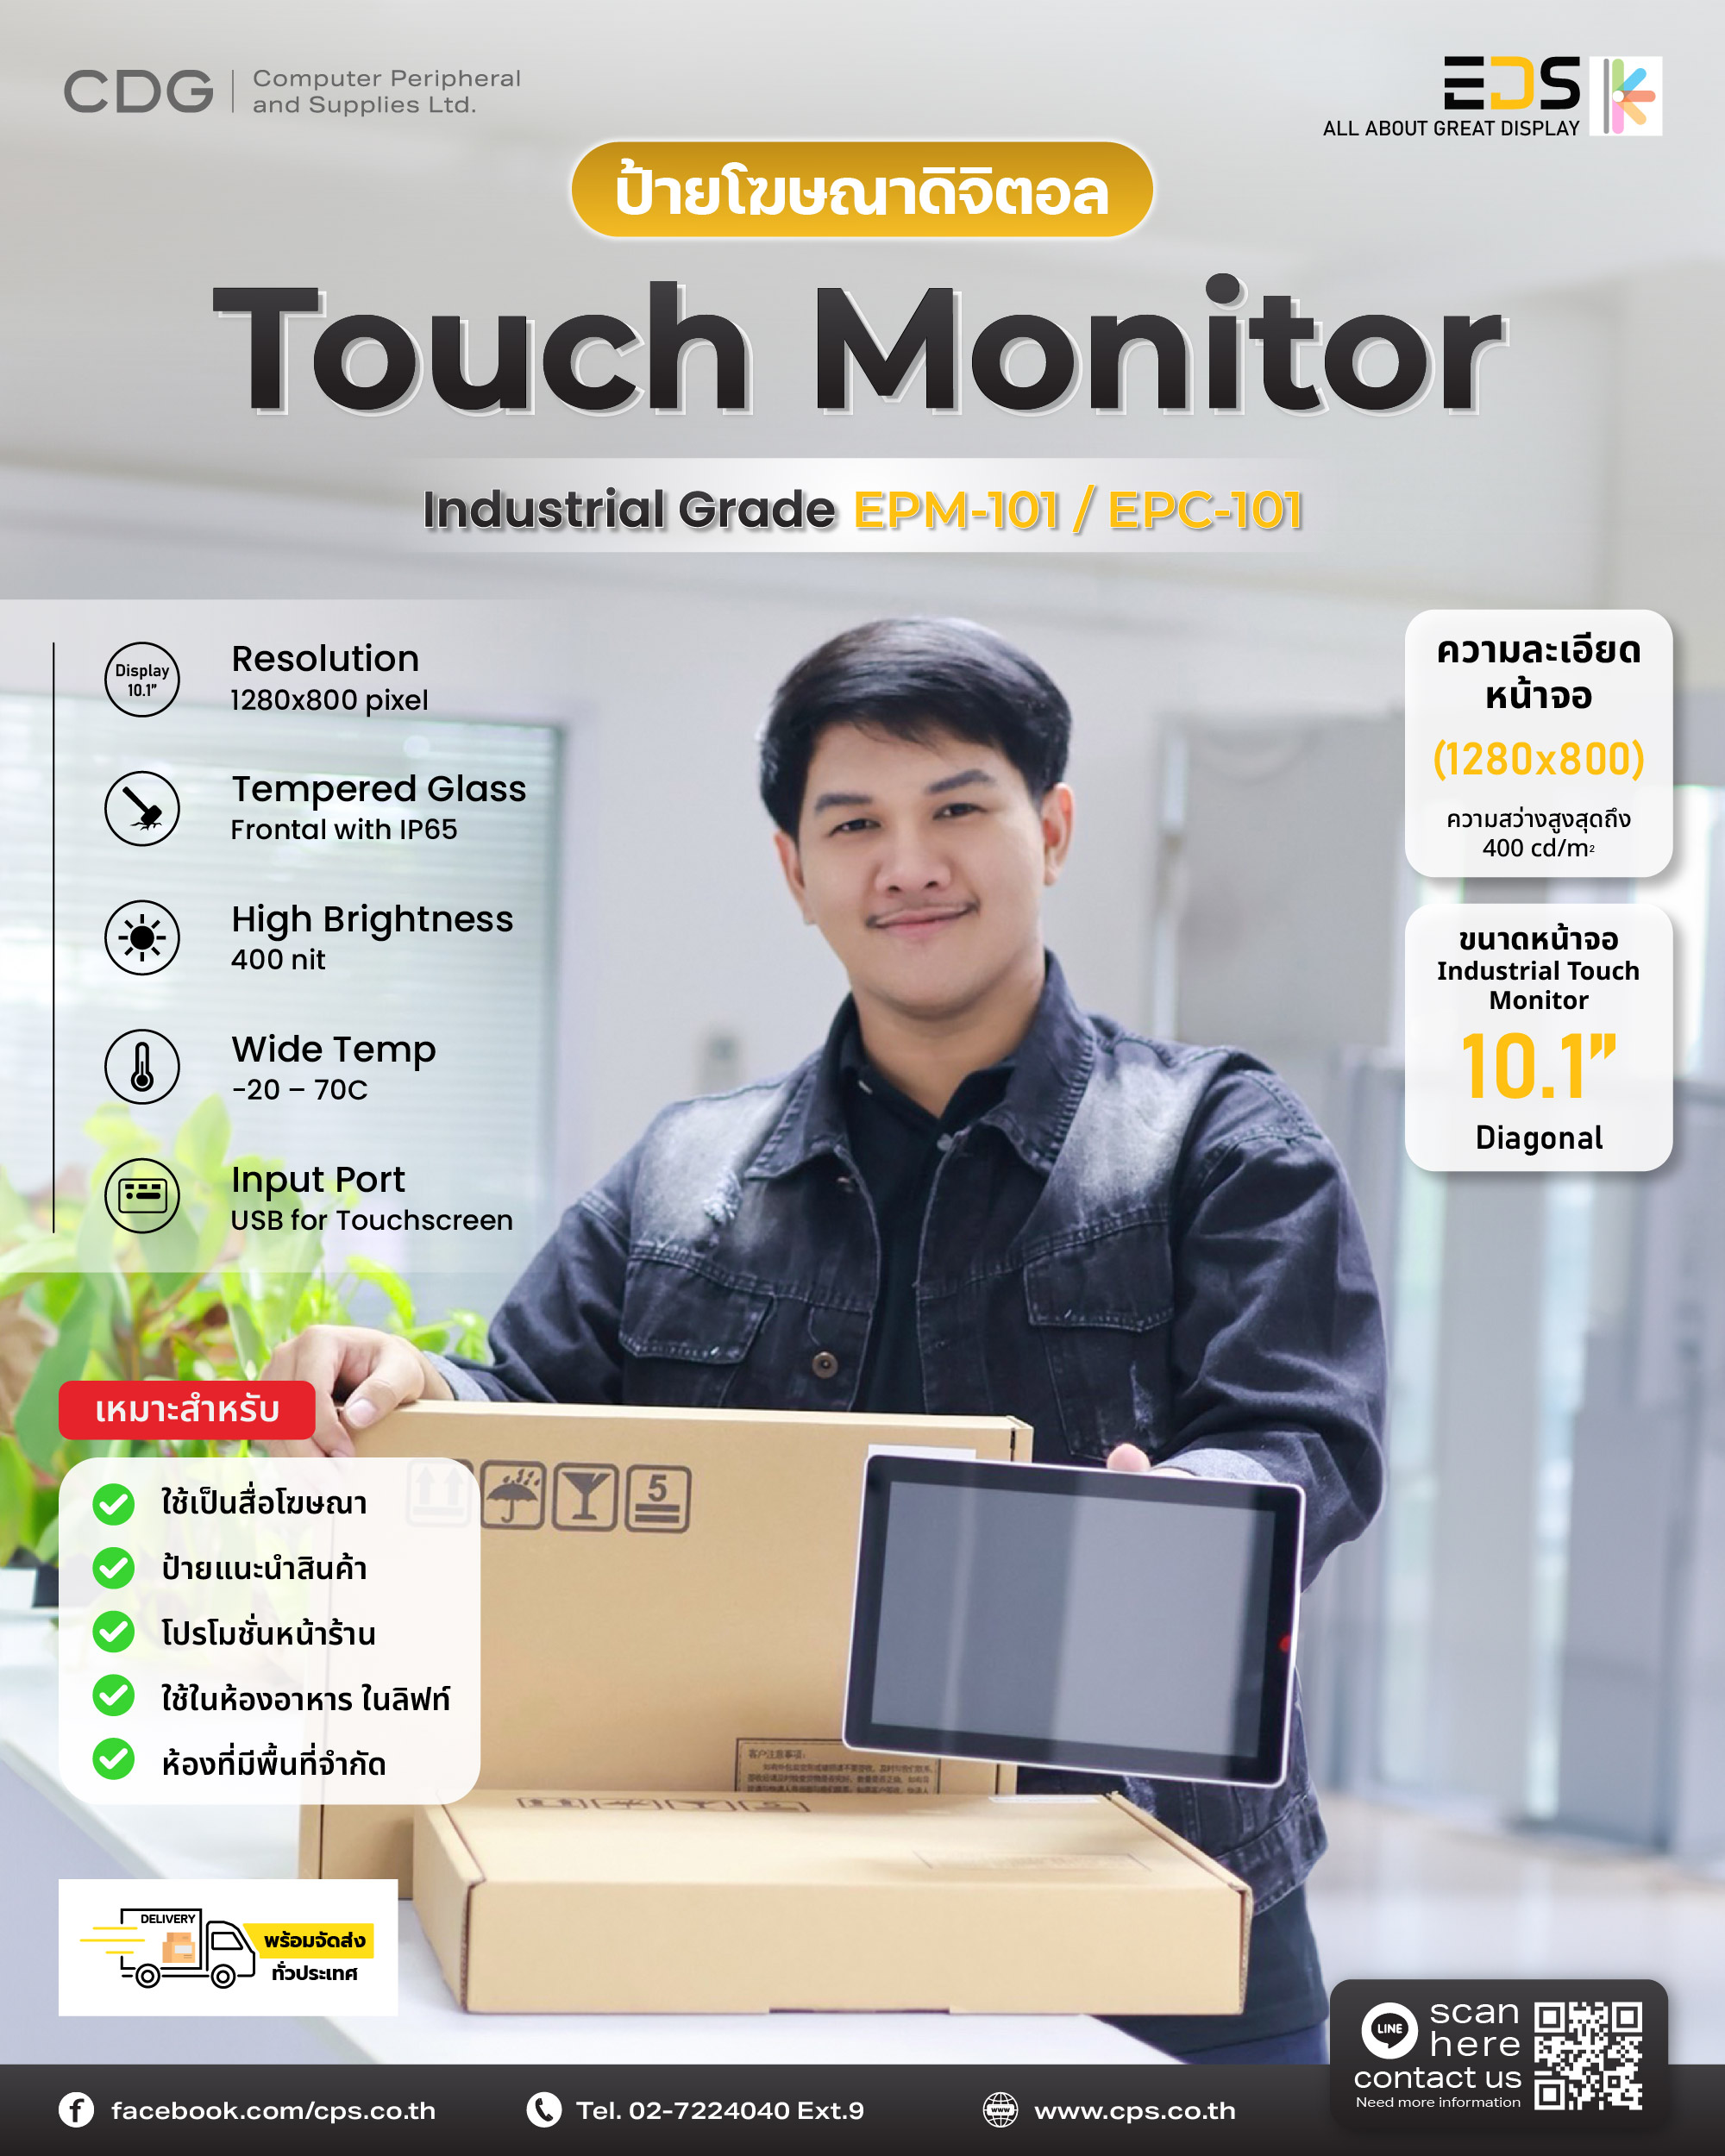 Industrial Touch Monitor EPM-101 / EPC-101